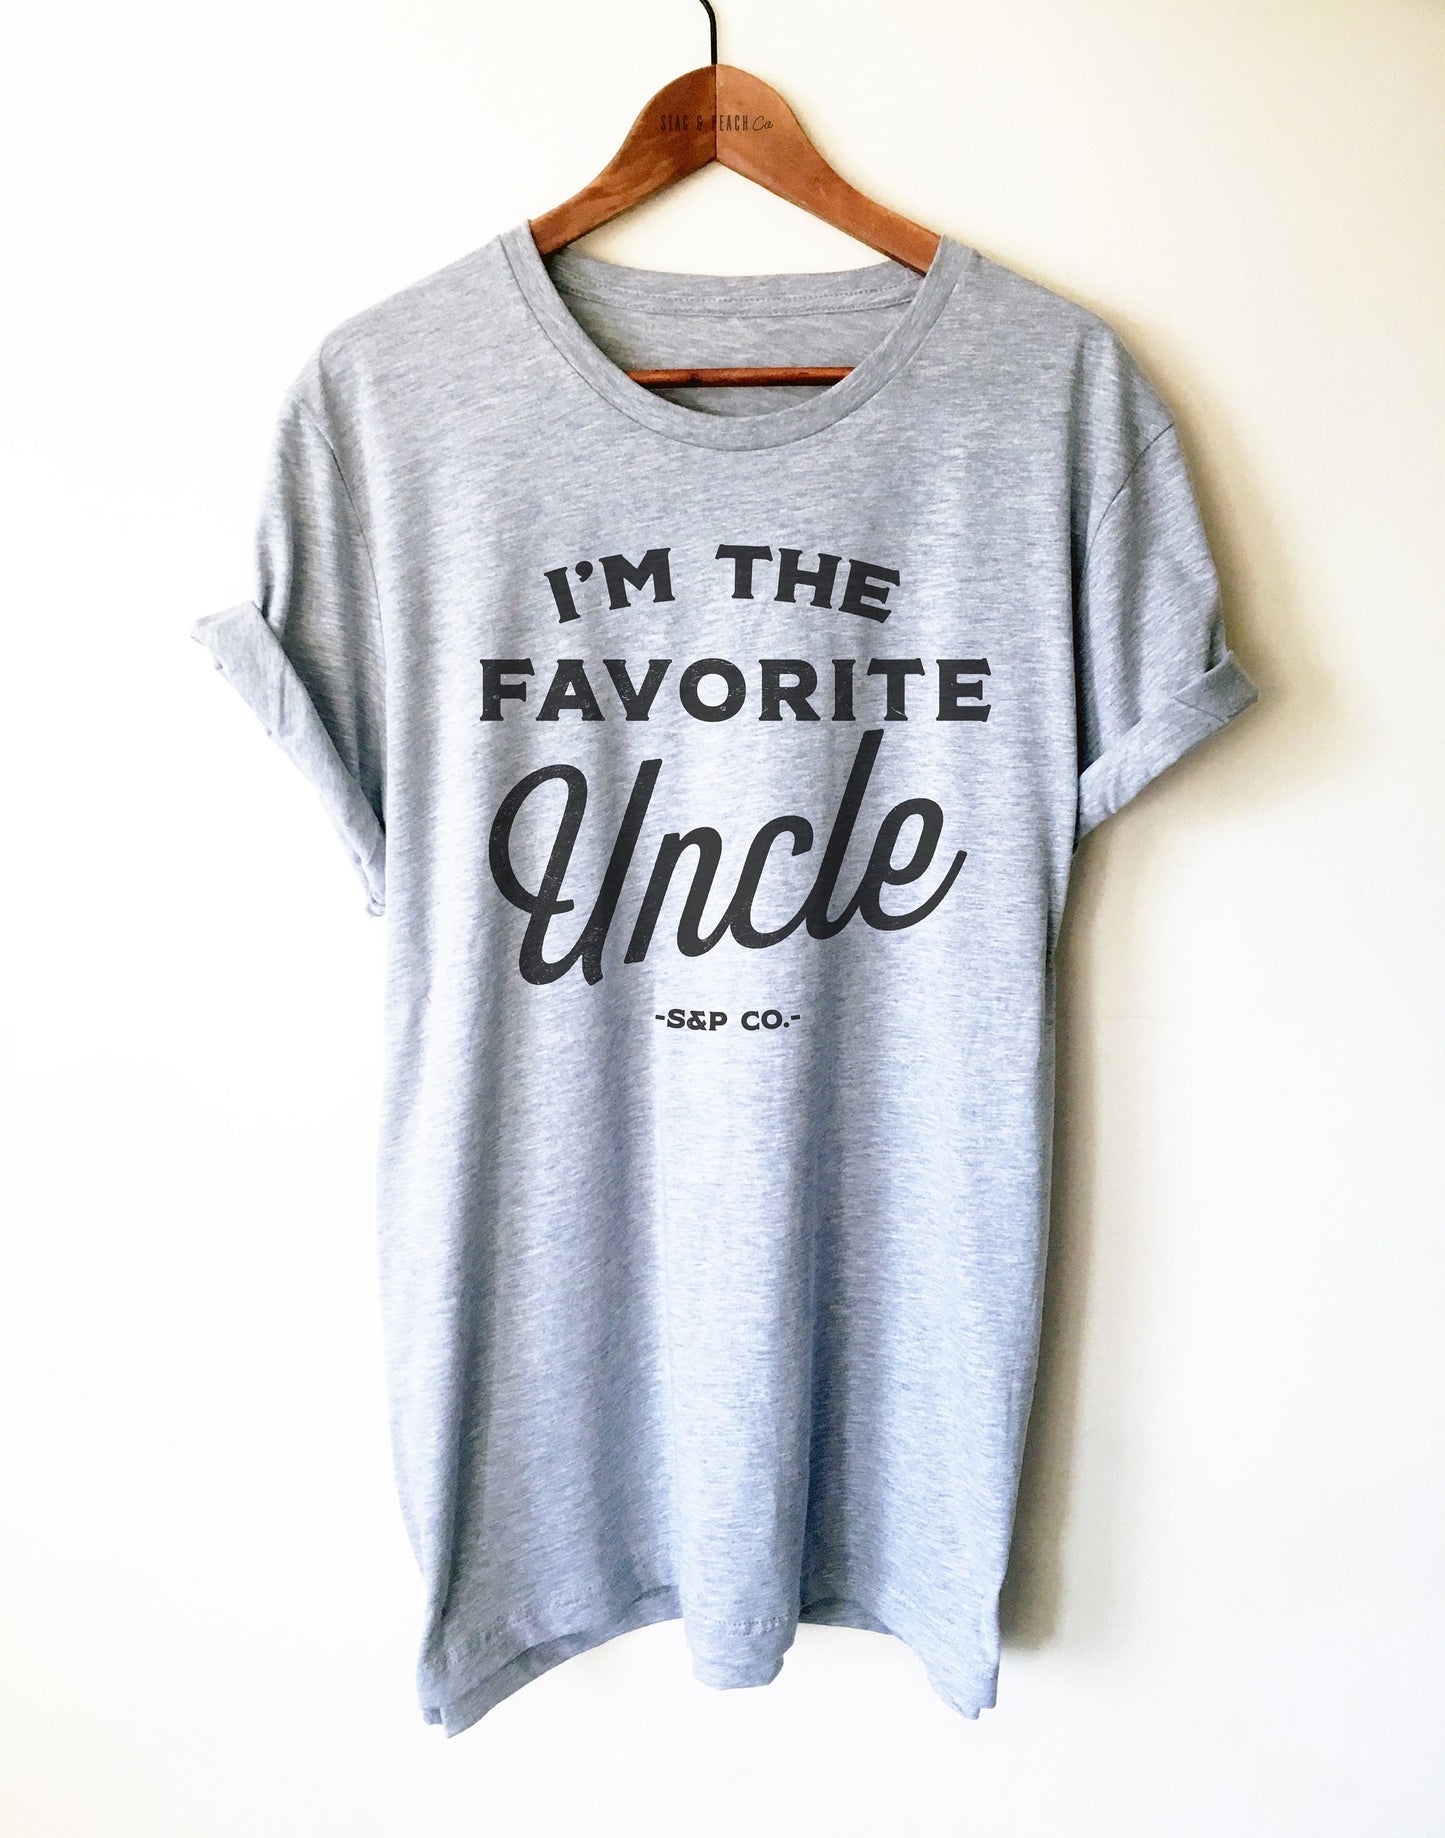 I'm The Favorite Uncle Unisex Shirt -Funny Uncle Shirt, Gift For Uncle From Niece or Nephew, Fathers Day Gift For Brother, Pregnancy Reveal